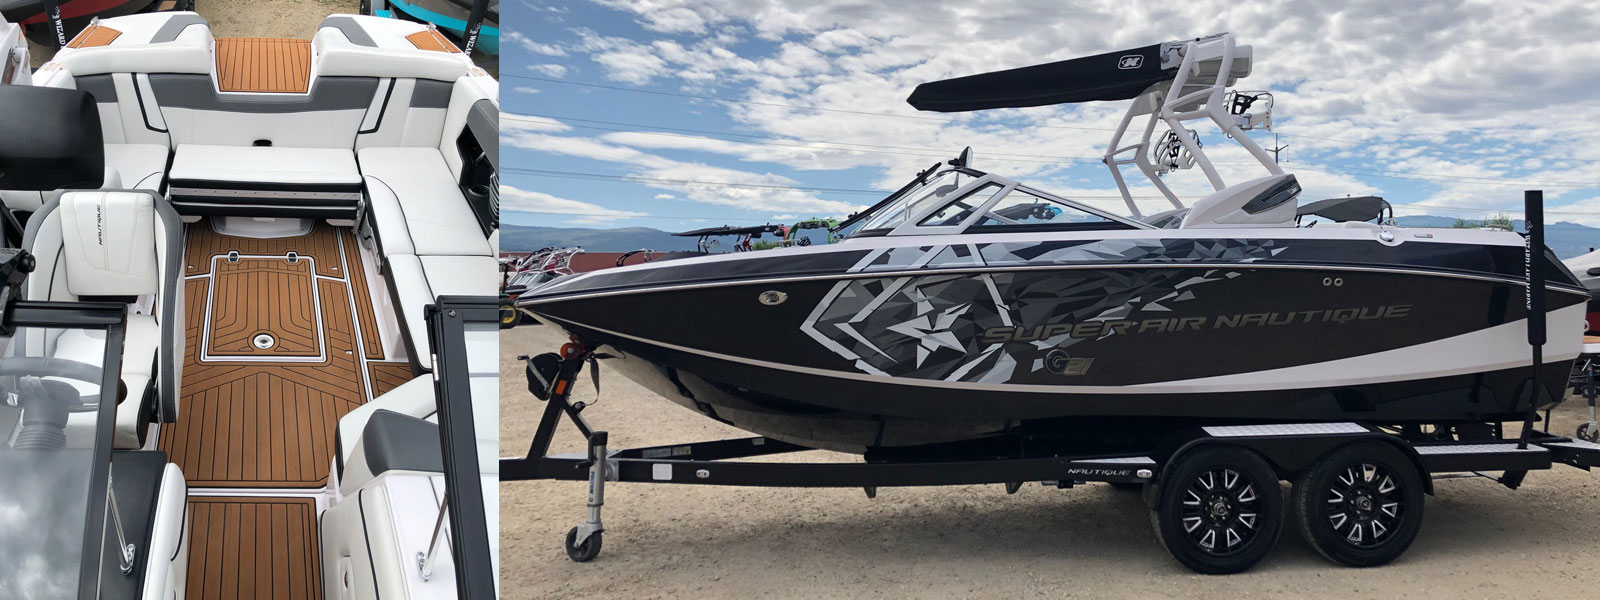 Super Air Nautique G21 Wakesurfing and Wakeboarding Boat